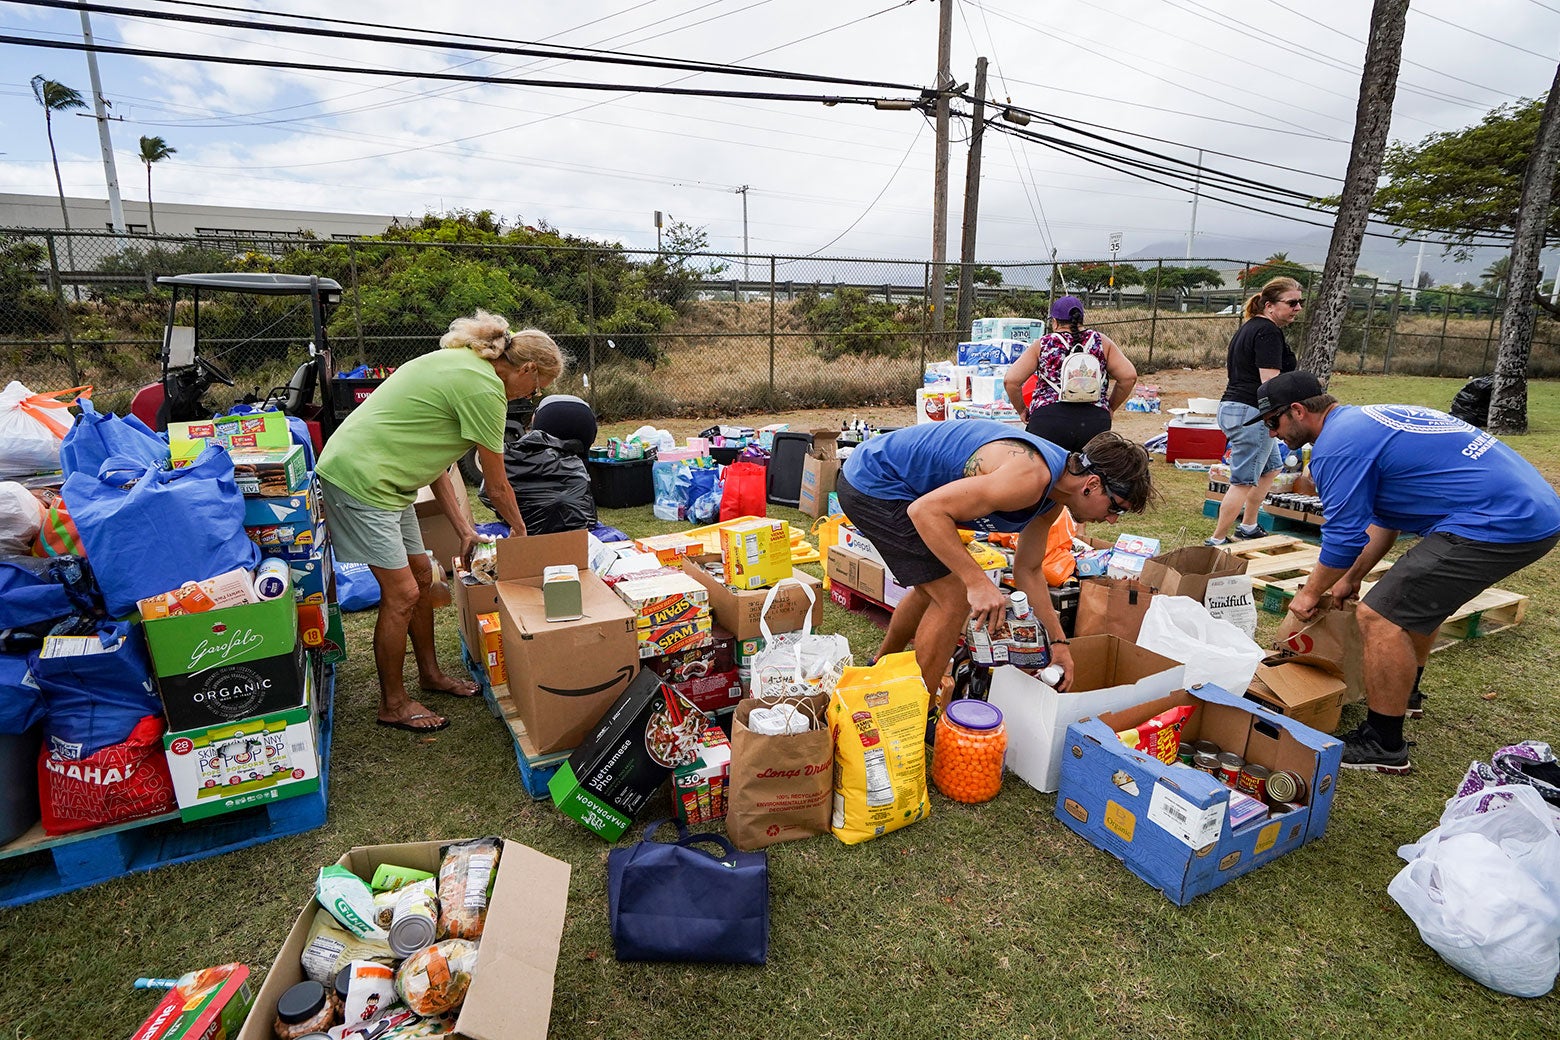 Volunteers in a grassy field work through cardboard boxes of food and other supplies.